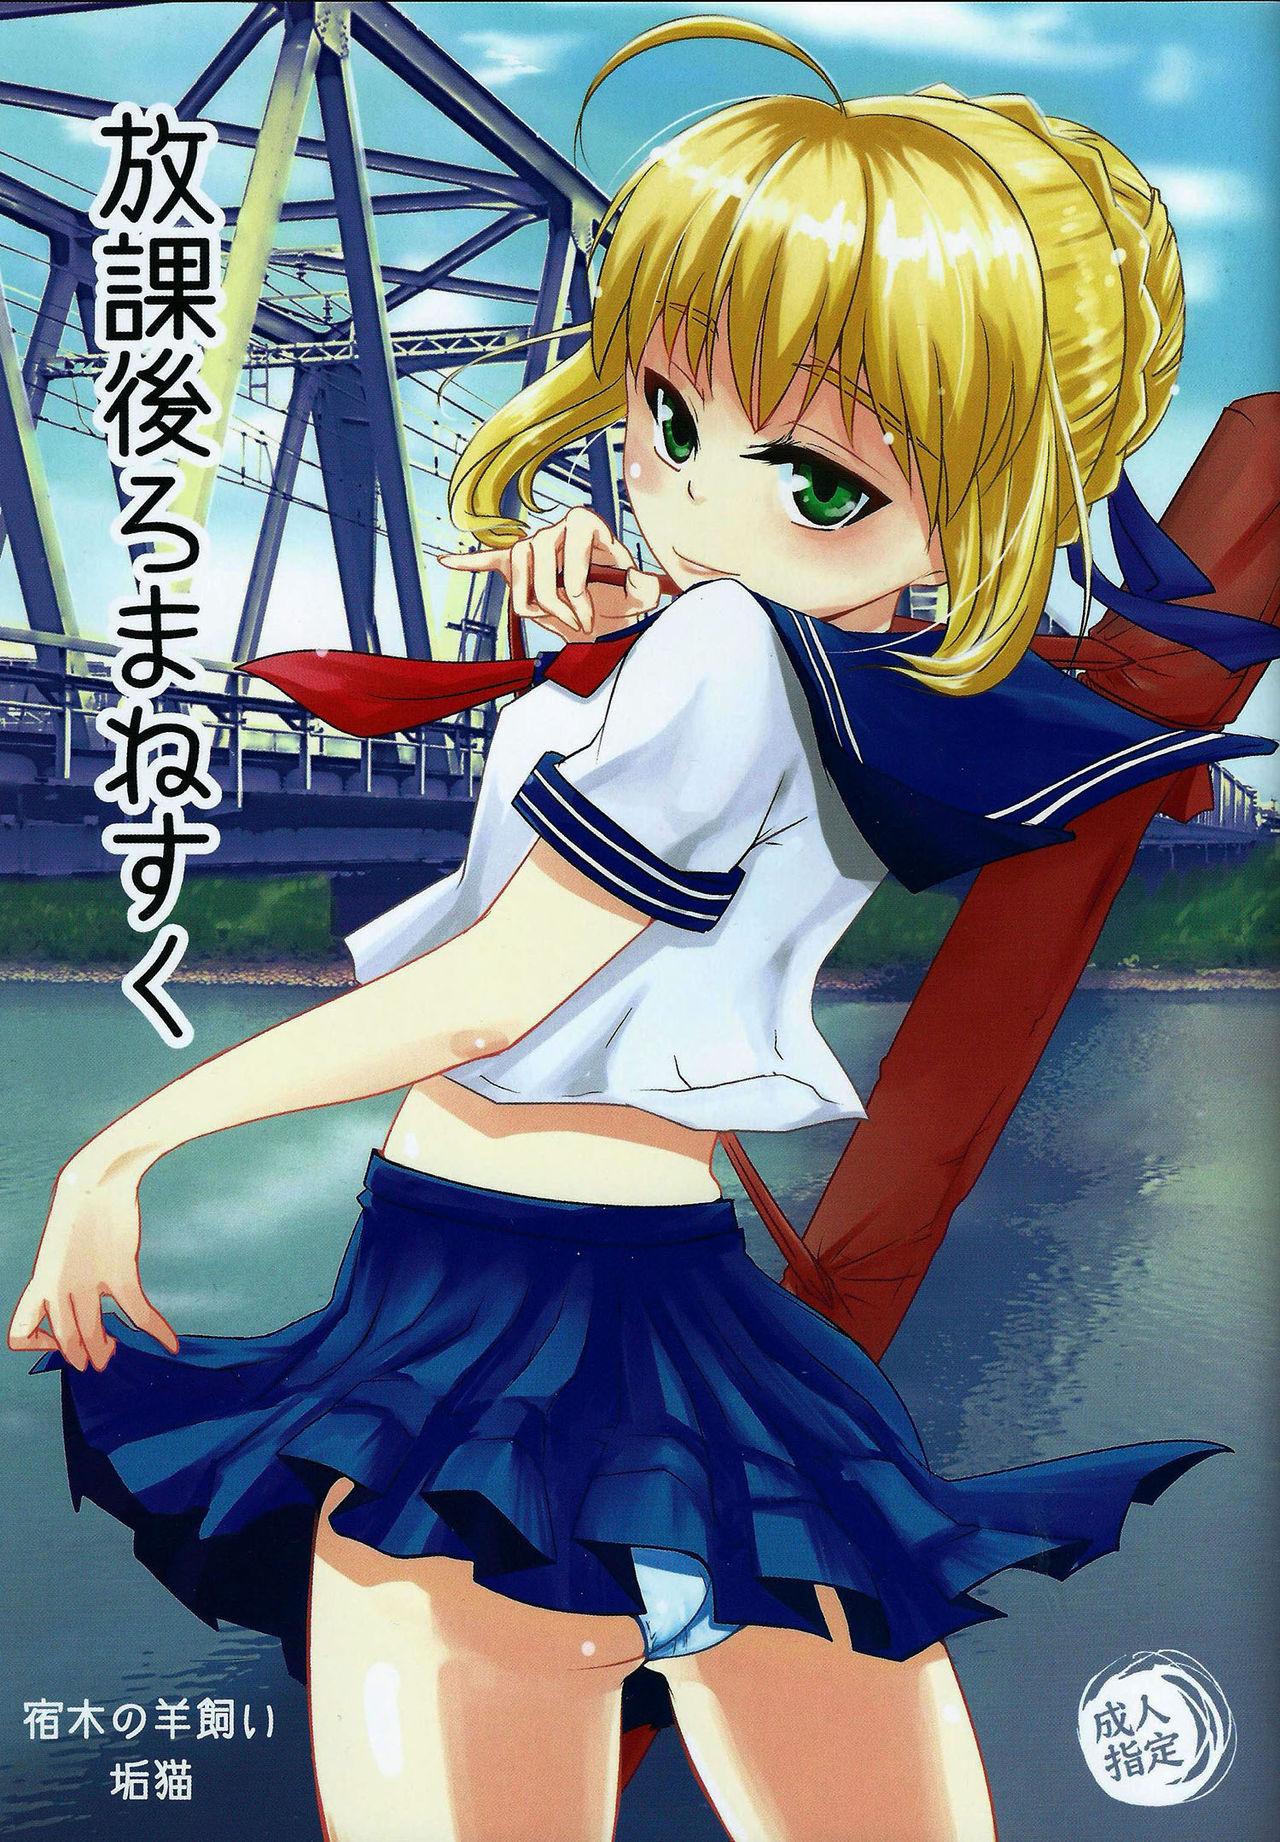 Milf Cougar Houkago Romance - Fate stay night Submission - Picture 1